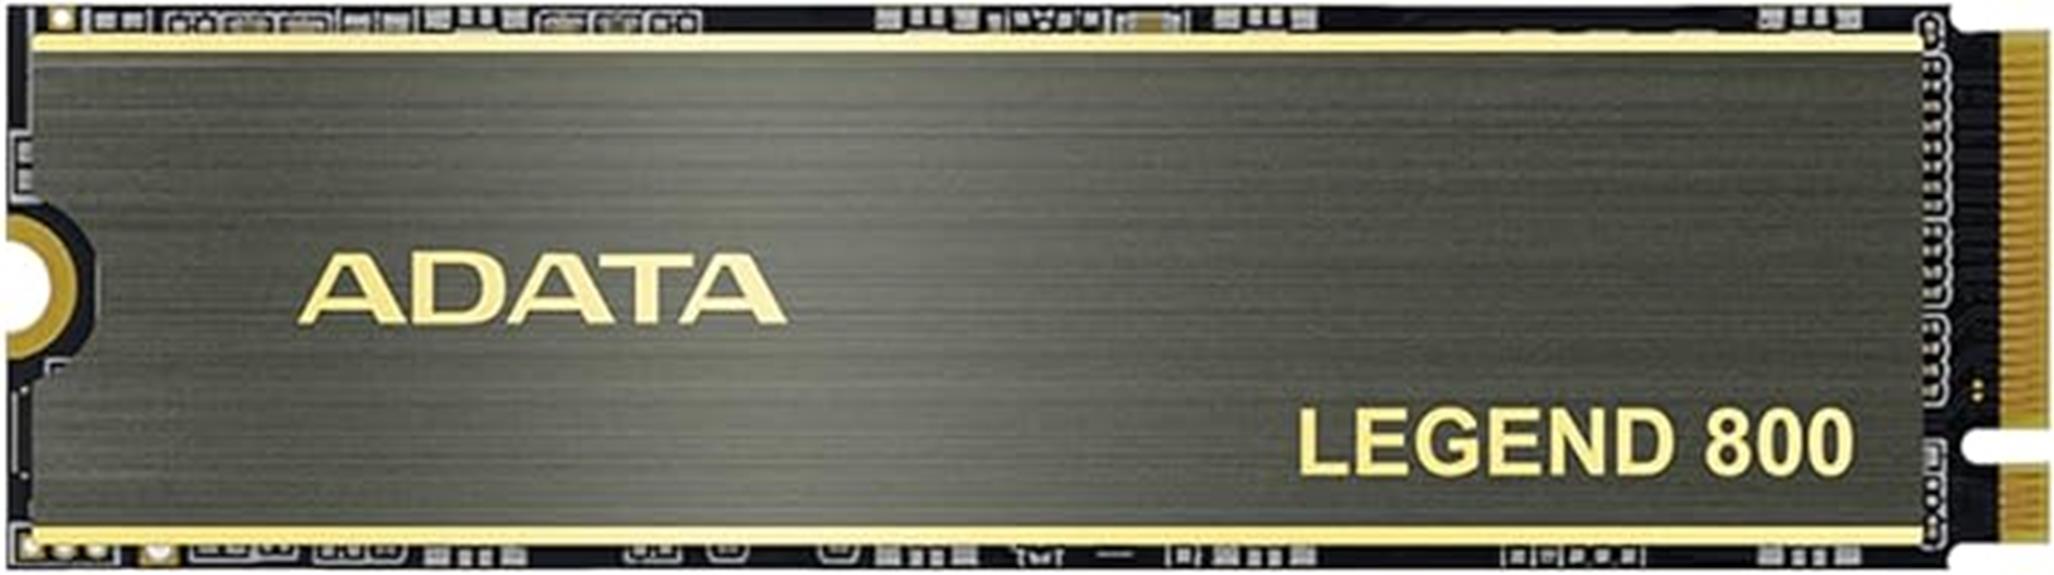 high performance ssd review